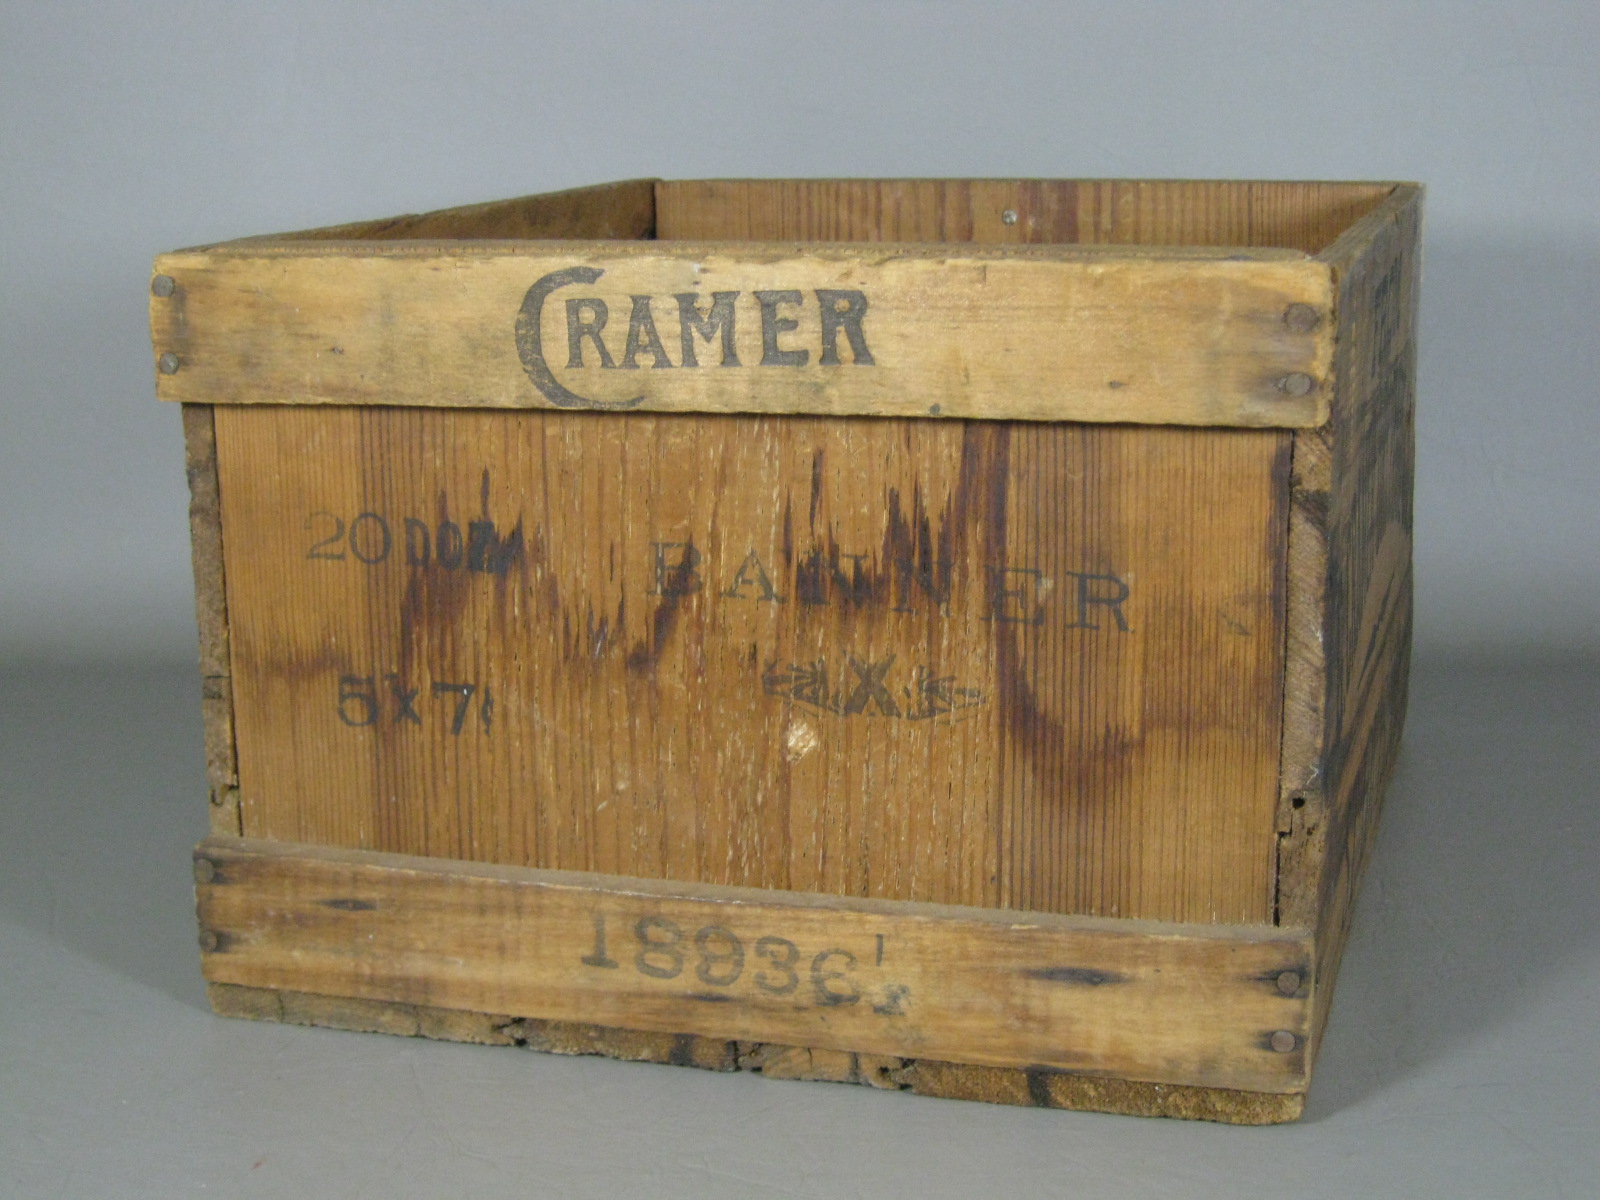 Antique 1800s Cramer Dry Plate Photo Negatives Wood Wooden Crate Box St. Louis 3